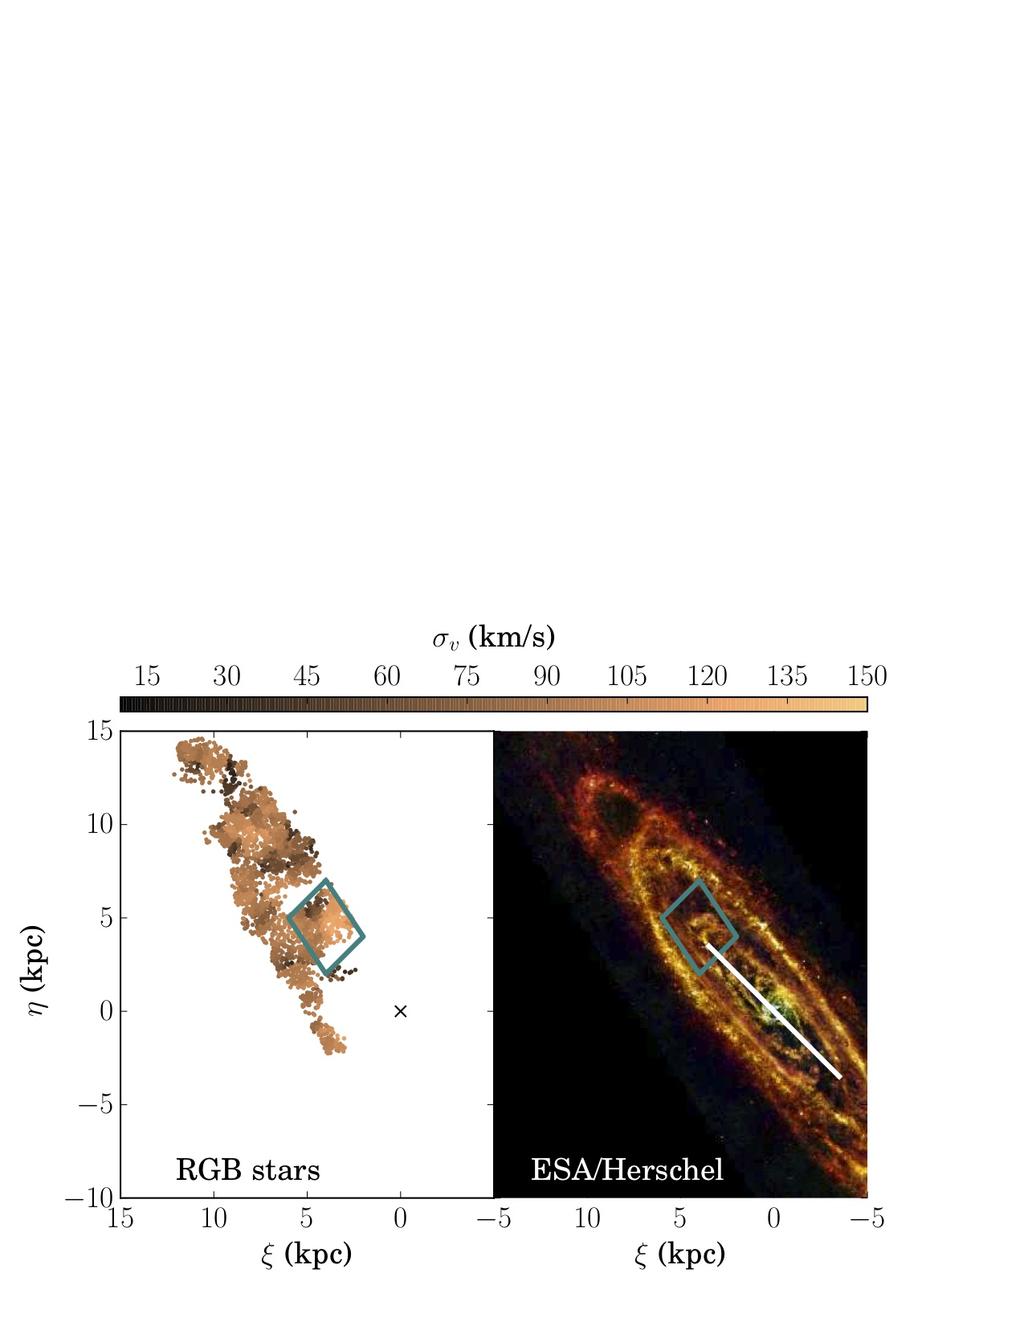 12 Dorman et al. Figure 8. RGB dispersion map from Figure 7 next to a Herschel image of M31 for reference. A high-dispersion region which we term the Brick 9 Region is outlined in teal in each panel.